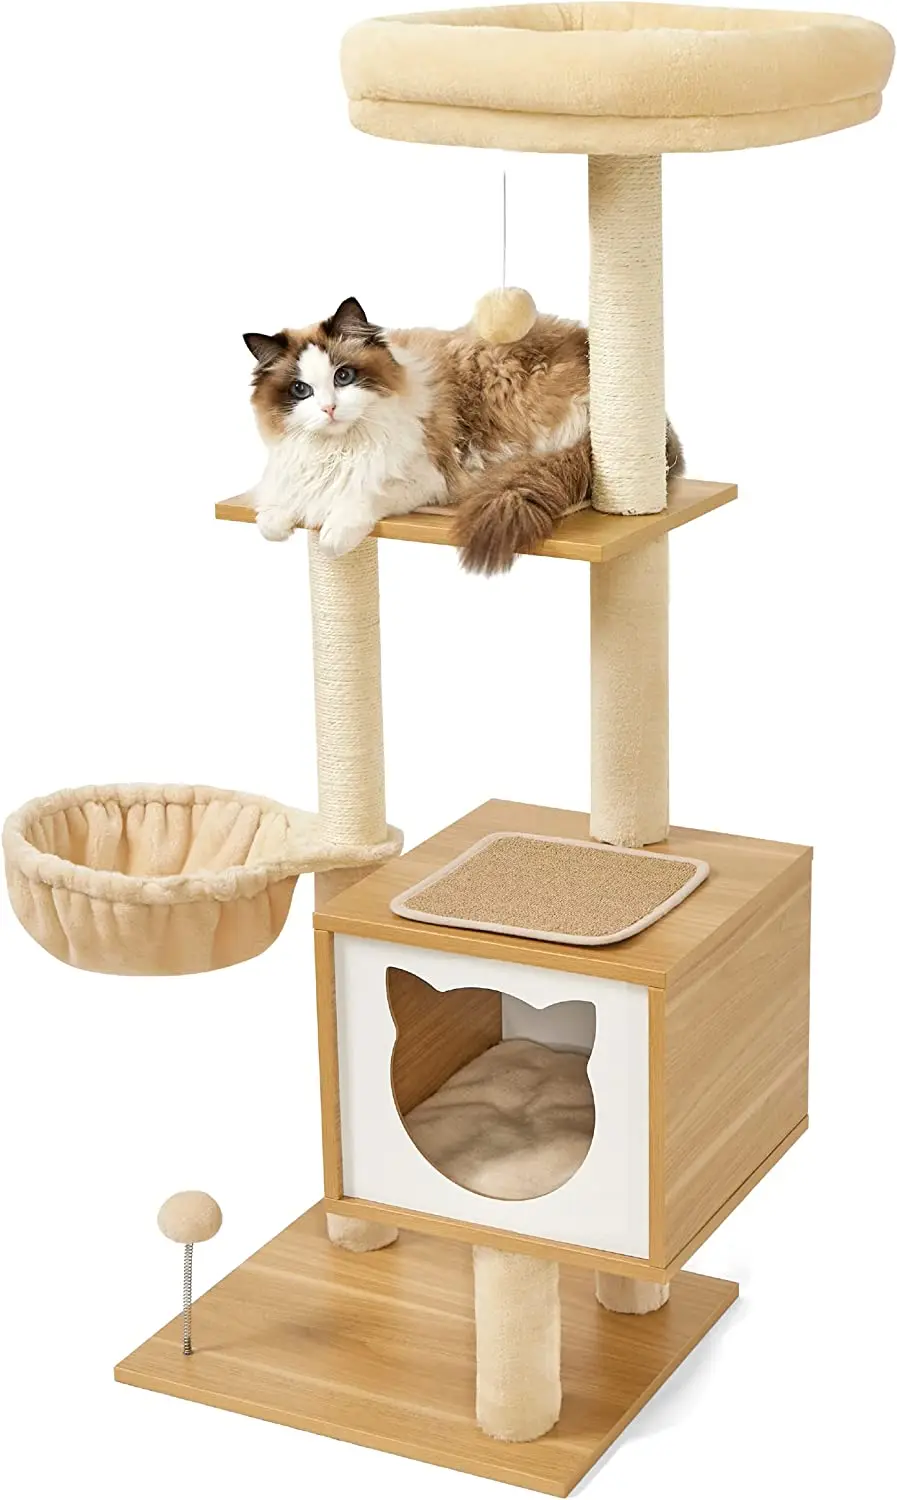 

POPTOP Cat Tree for Large Cats - Tall Climbing Tower for Indoor Cats with Wood Condo, Hammock and Scratching Post, 50 Inches,